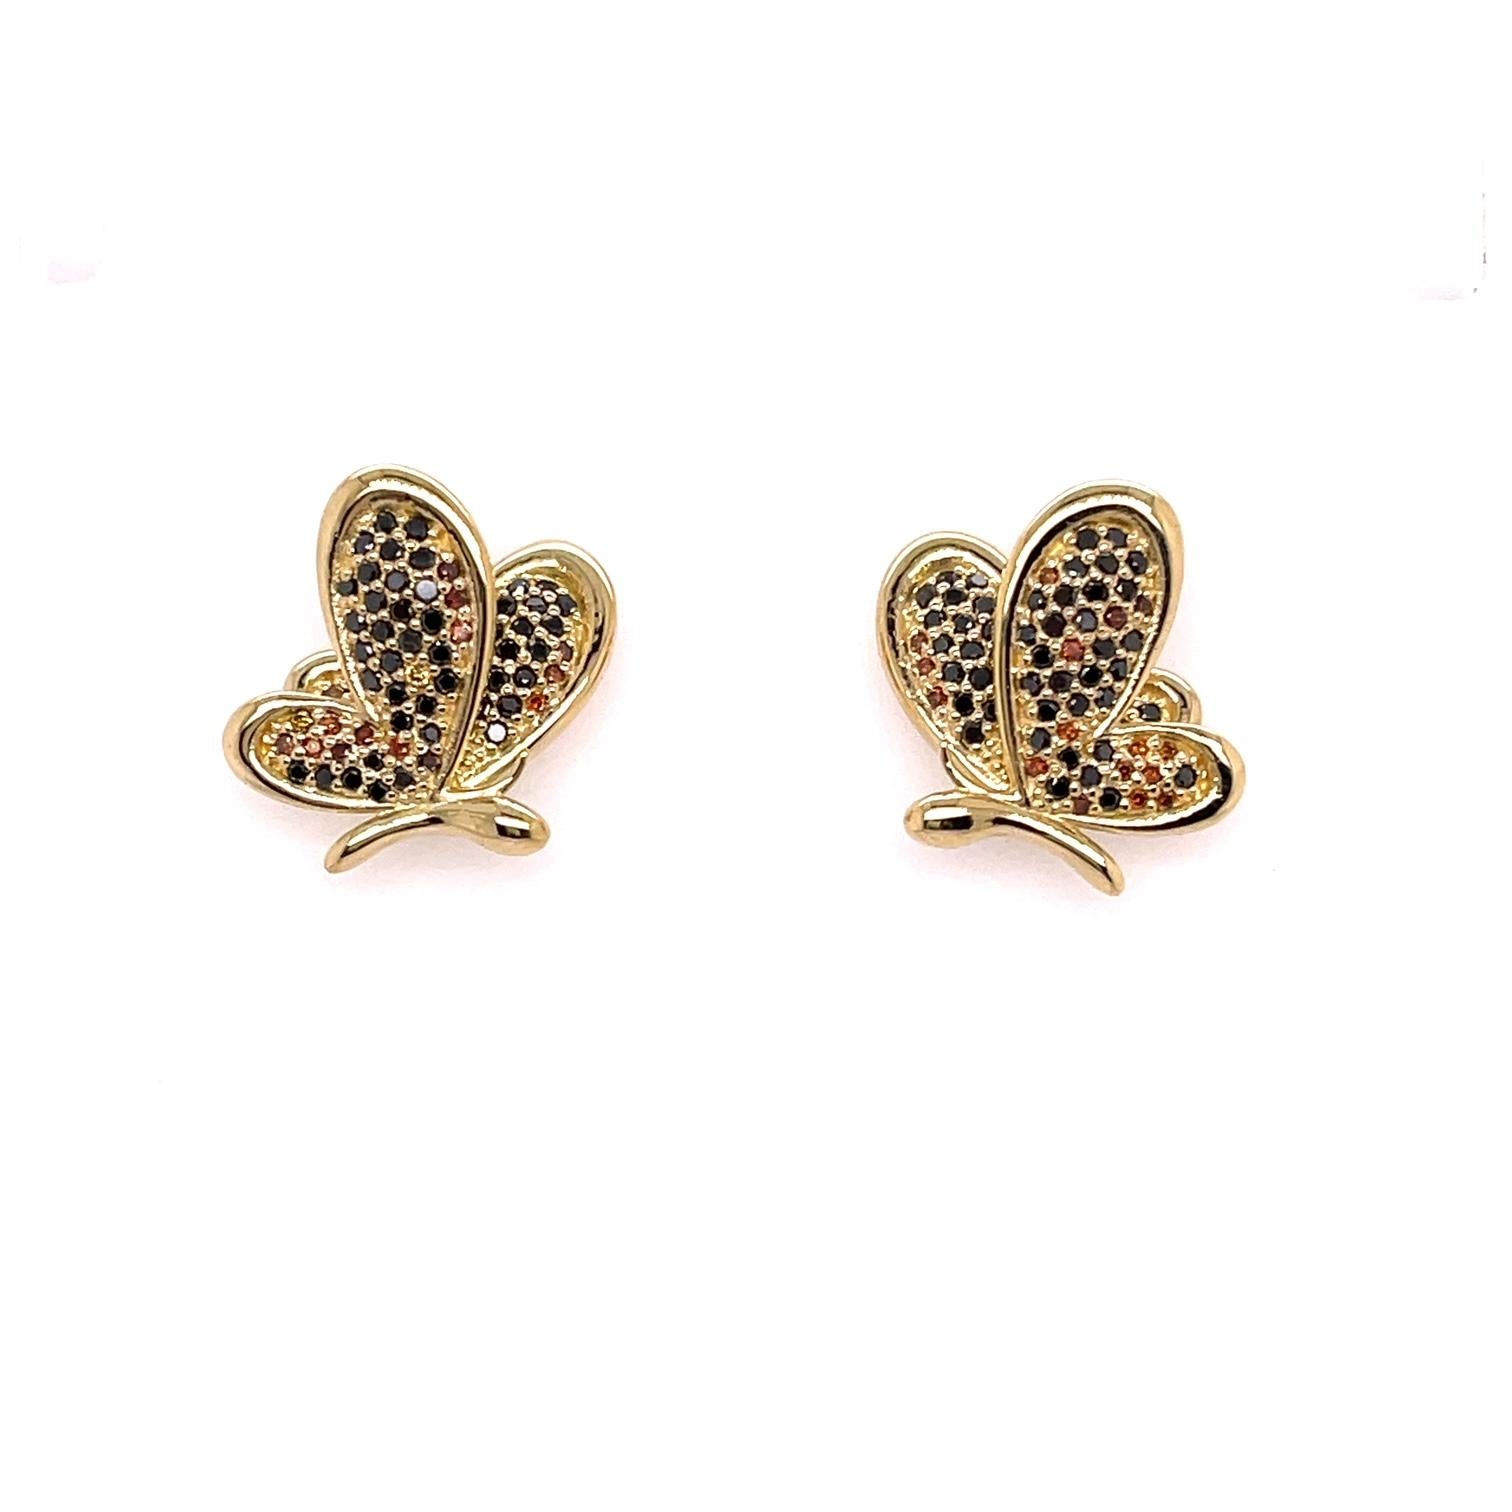 A pair of 18k yellow gold butterfly studs set with .55carats of black and sherry colored diamonds and a pair of 18k yellow gold jackets, set with two 4mm Spessertite garnets, .7 carats, three 3.5mm yellow sapphires, and one 3mm orange sapphires, .84